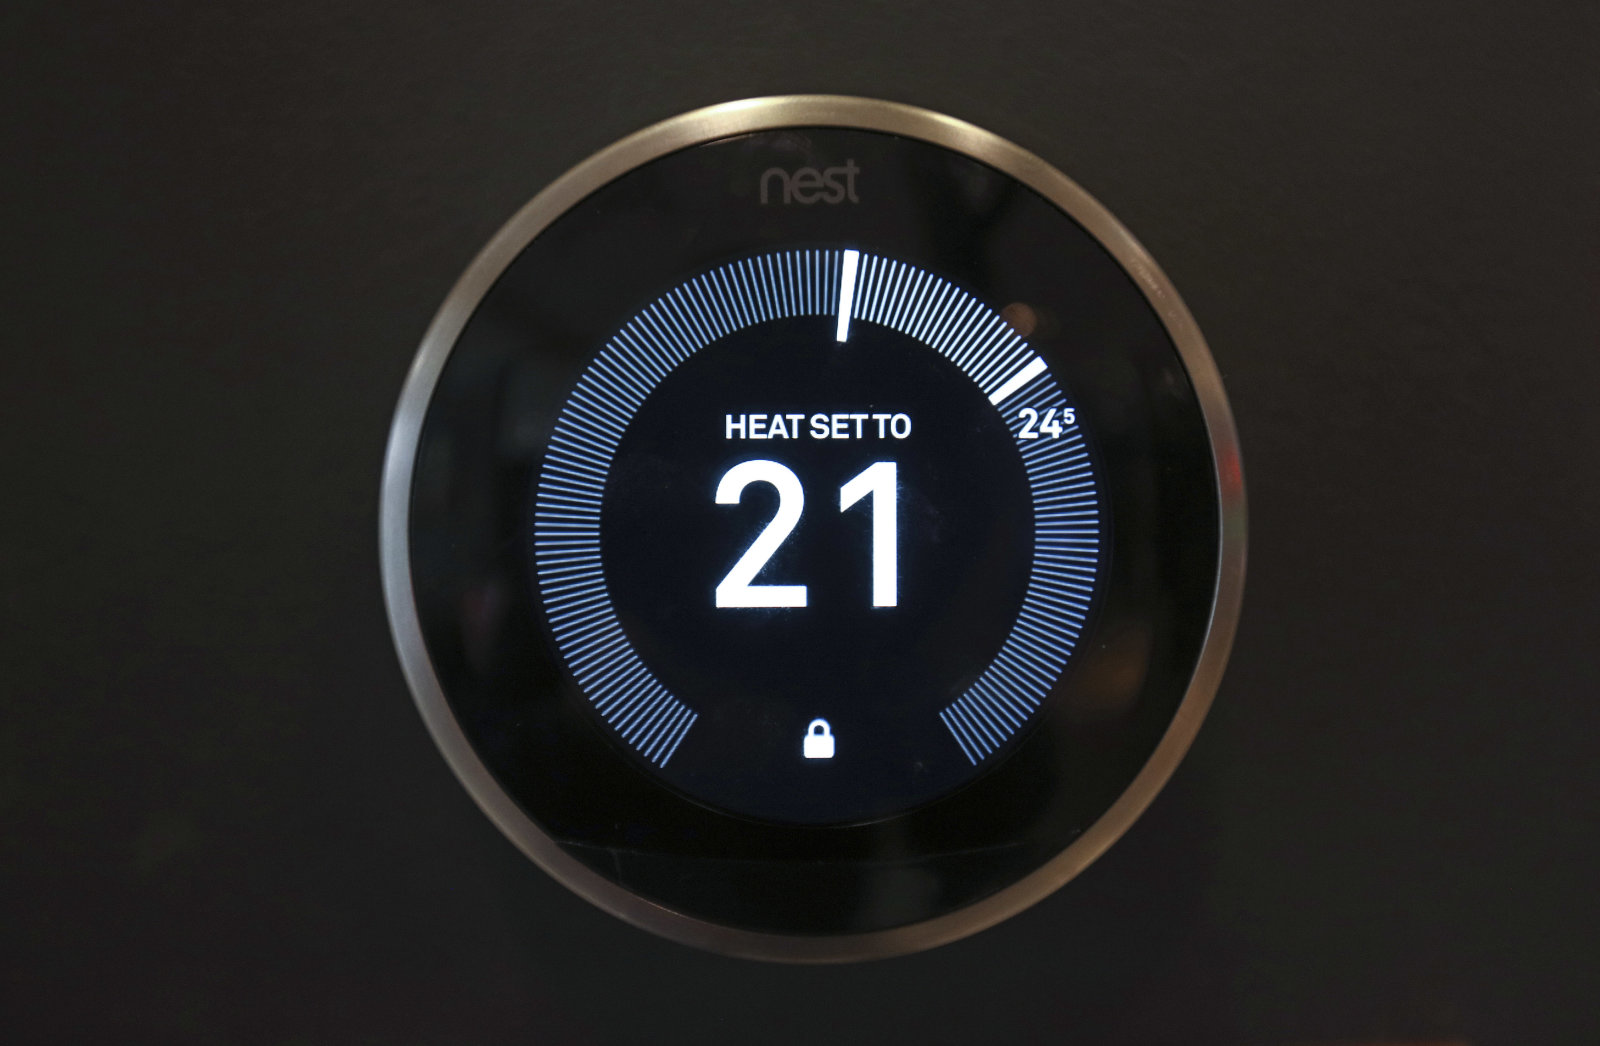 A Nest Labs Inc. digital wireless controlled thermostat sits on display in the Smart Home section of a John Lewis Plc department store in London, U.K., on Friday, April 8, 2016. The increasing integration of connected devices into our lives, what is commonly referred to as the Internet of things or IoT, promises enormous benefits for consumers and businesses. Photographer: Chris Ratcliffe/Bloomberg via Getty Images